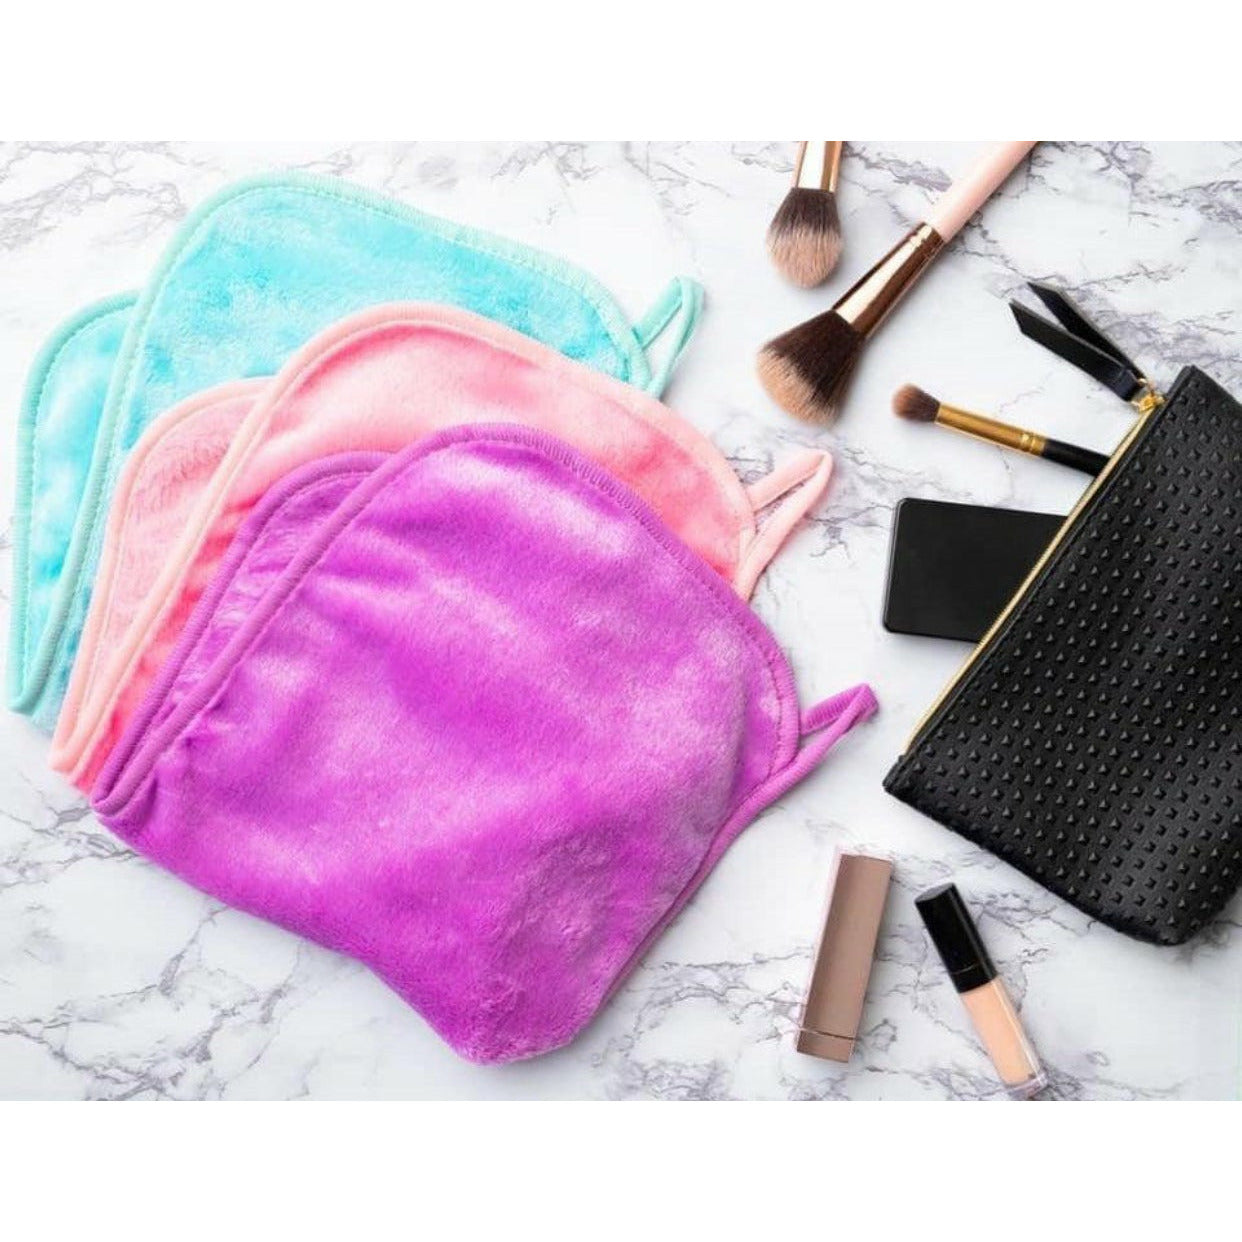 Wash Away the Day Makeup Remover Cloth